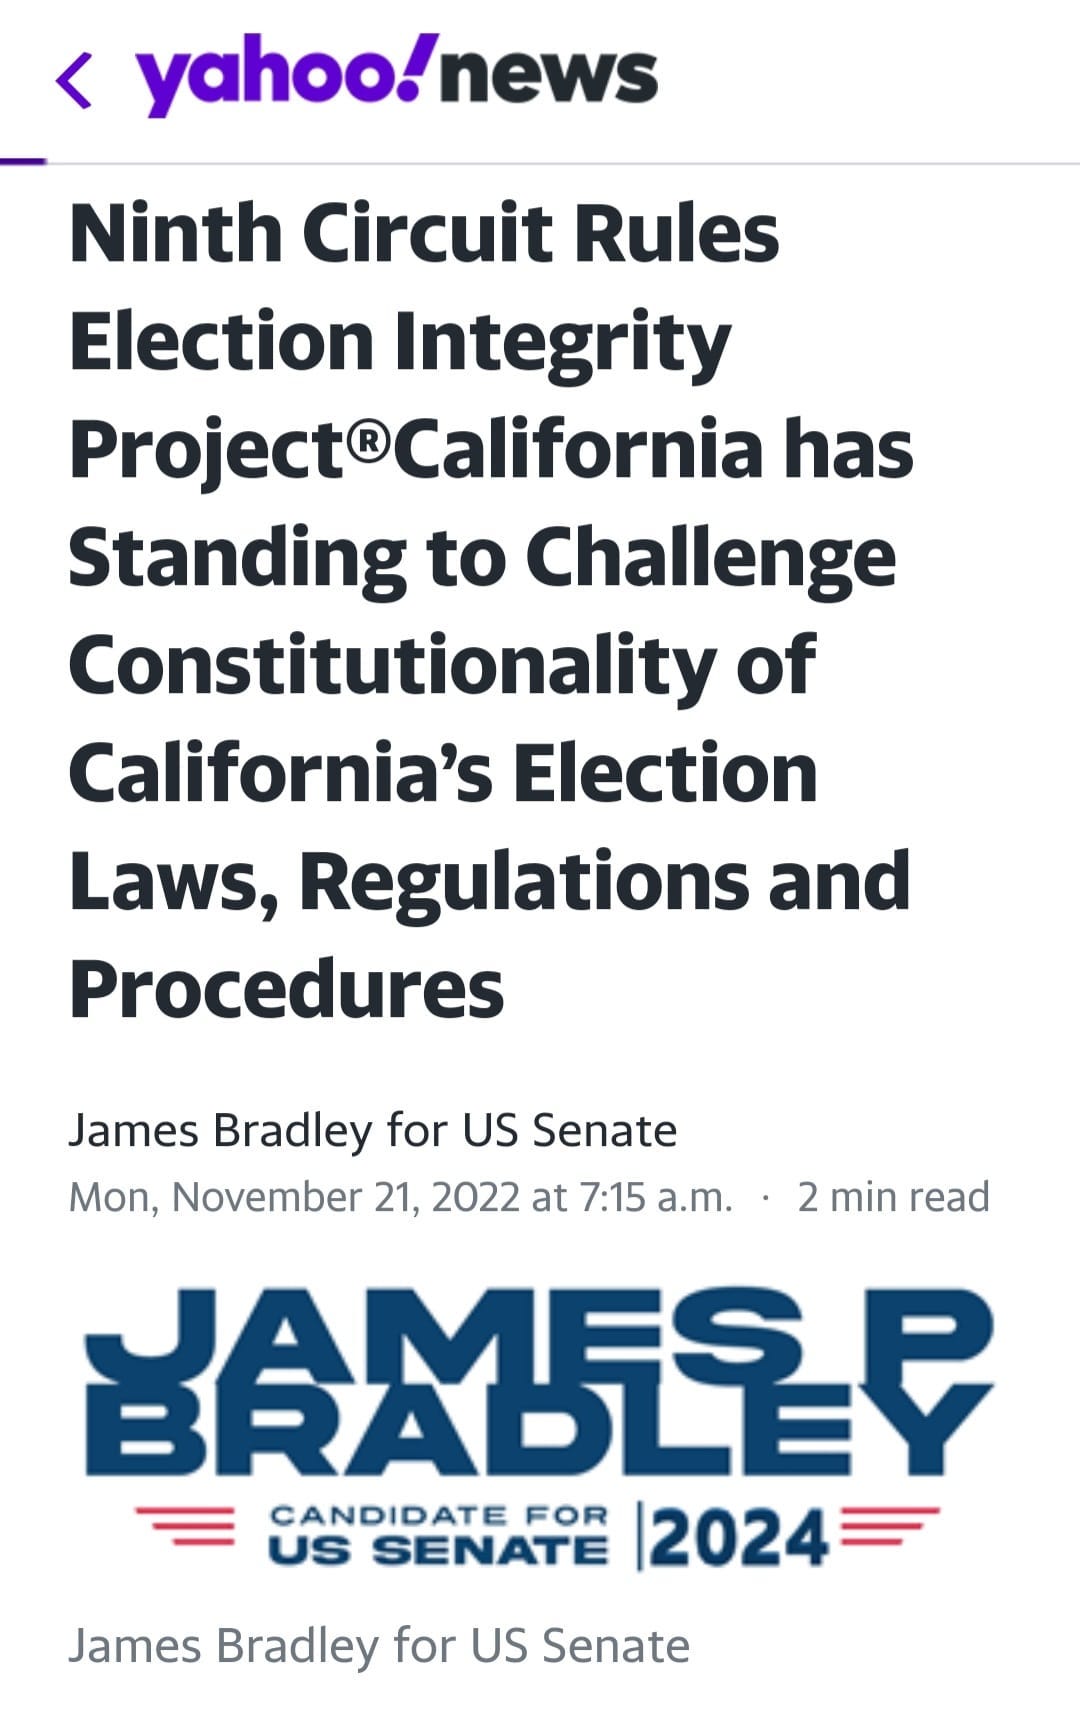 May be an image of text that says '< yahoo!news Ninth Circuit Rules Election Integrity Project®California California has Standing to Challenge Constitutionality of California's Election Laws, Regulations and Procedures James Bradley for US Senate Mon, November 21, 2022 at 7:15 a.m. min read HAMLSP CANDIDATE FOR US SENATE 2024= James Bradley for US Senate'